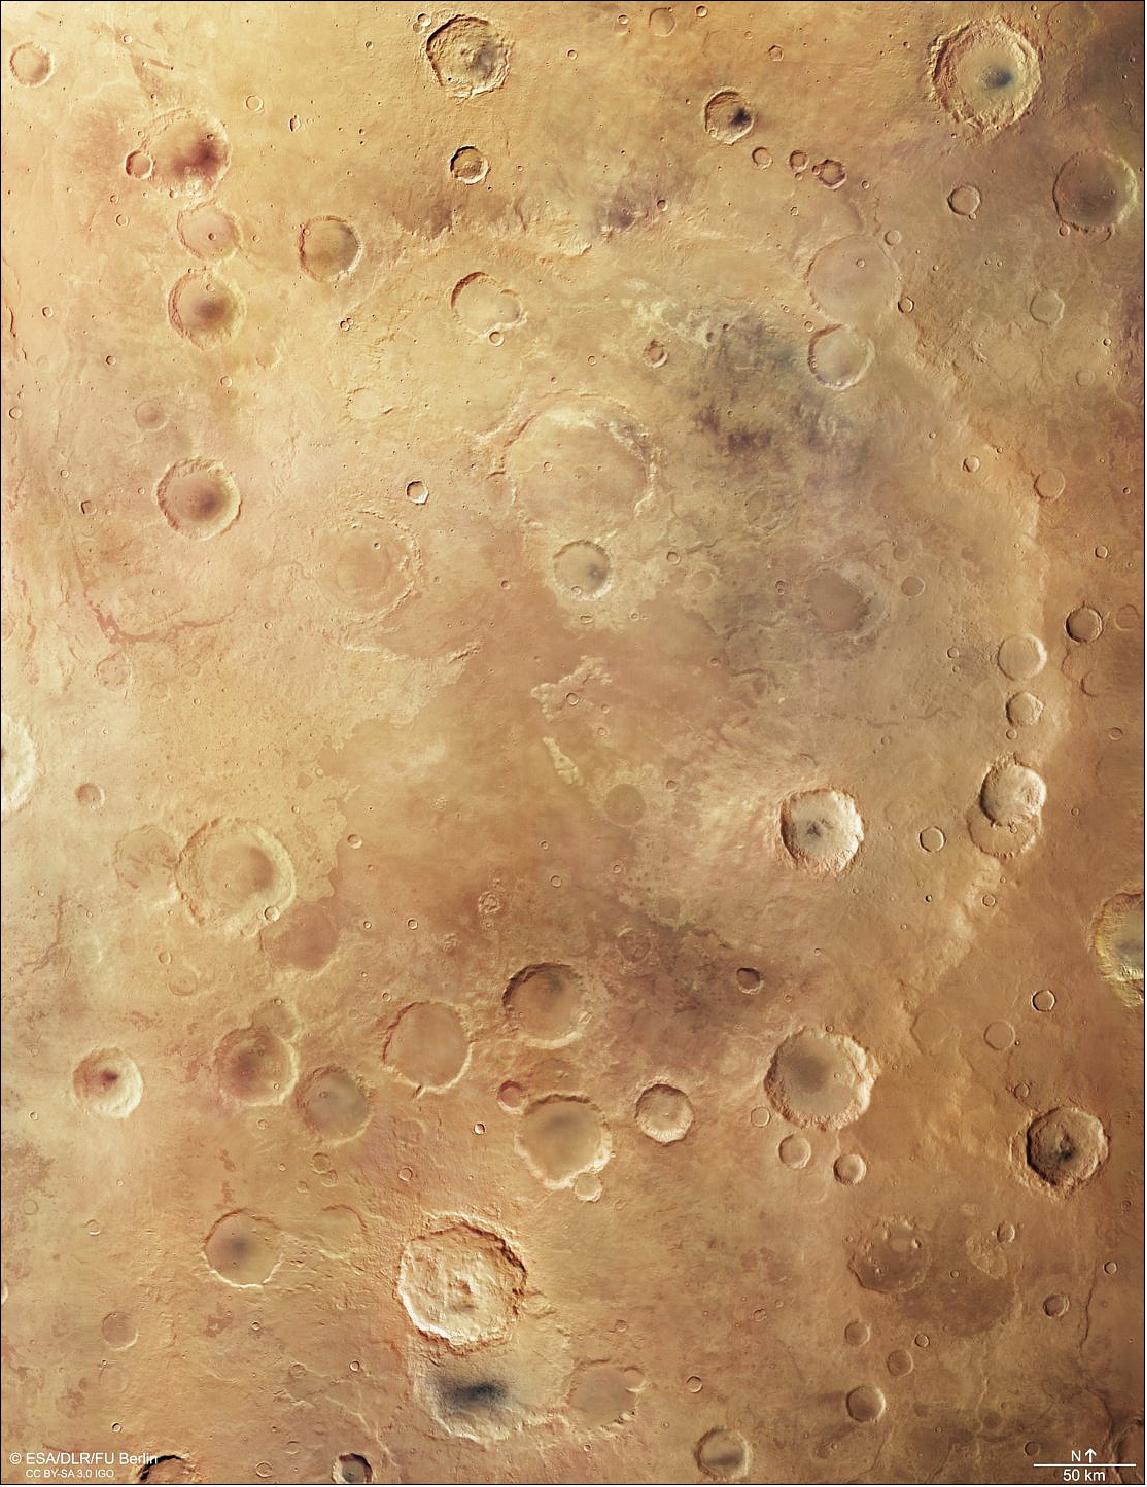 Figure 70: This image shows the landscape in and around Greeley crater, a degraded impact crater in the southern highlands of Mars. This color image was created using data from the nadir channel, the field of view which is aligned perpendicular to the surface of Mars, and the camera’s color channels (image credit: ESA/DLR/FU Berlin, CC BY-SA 3.0 IGO) 30)